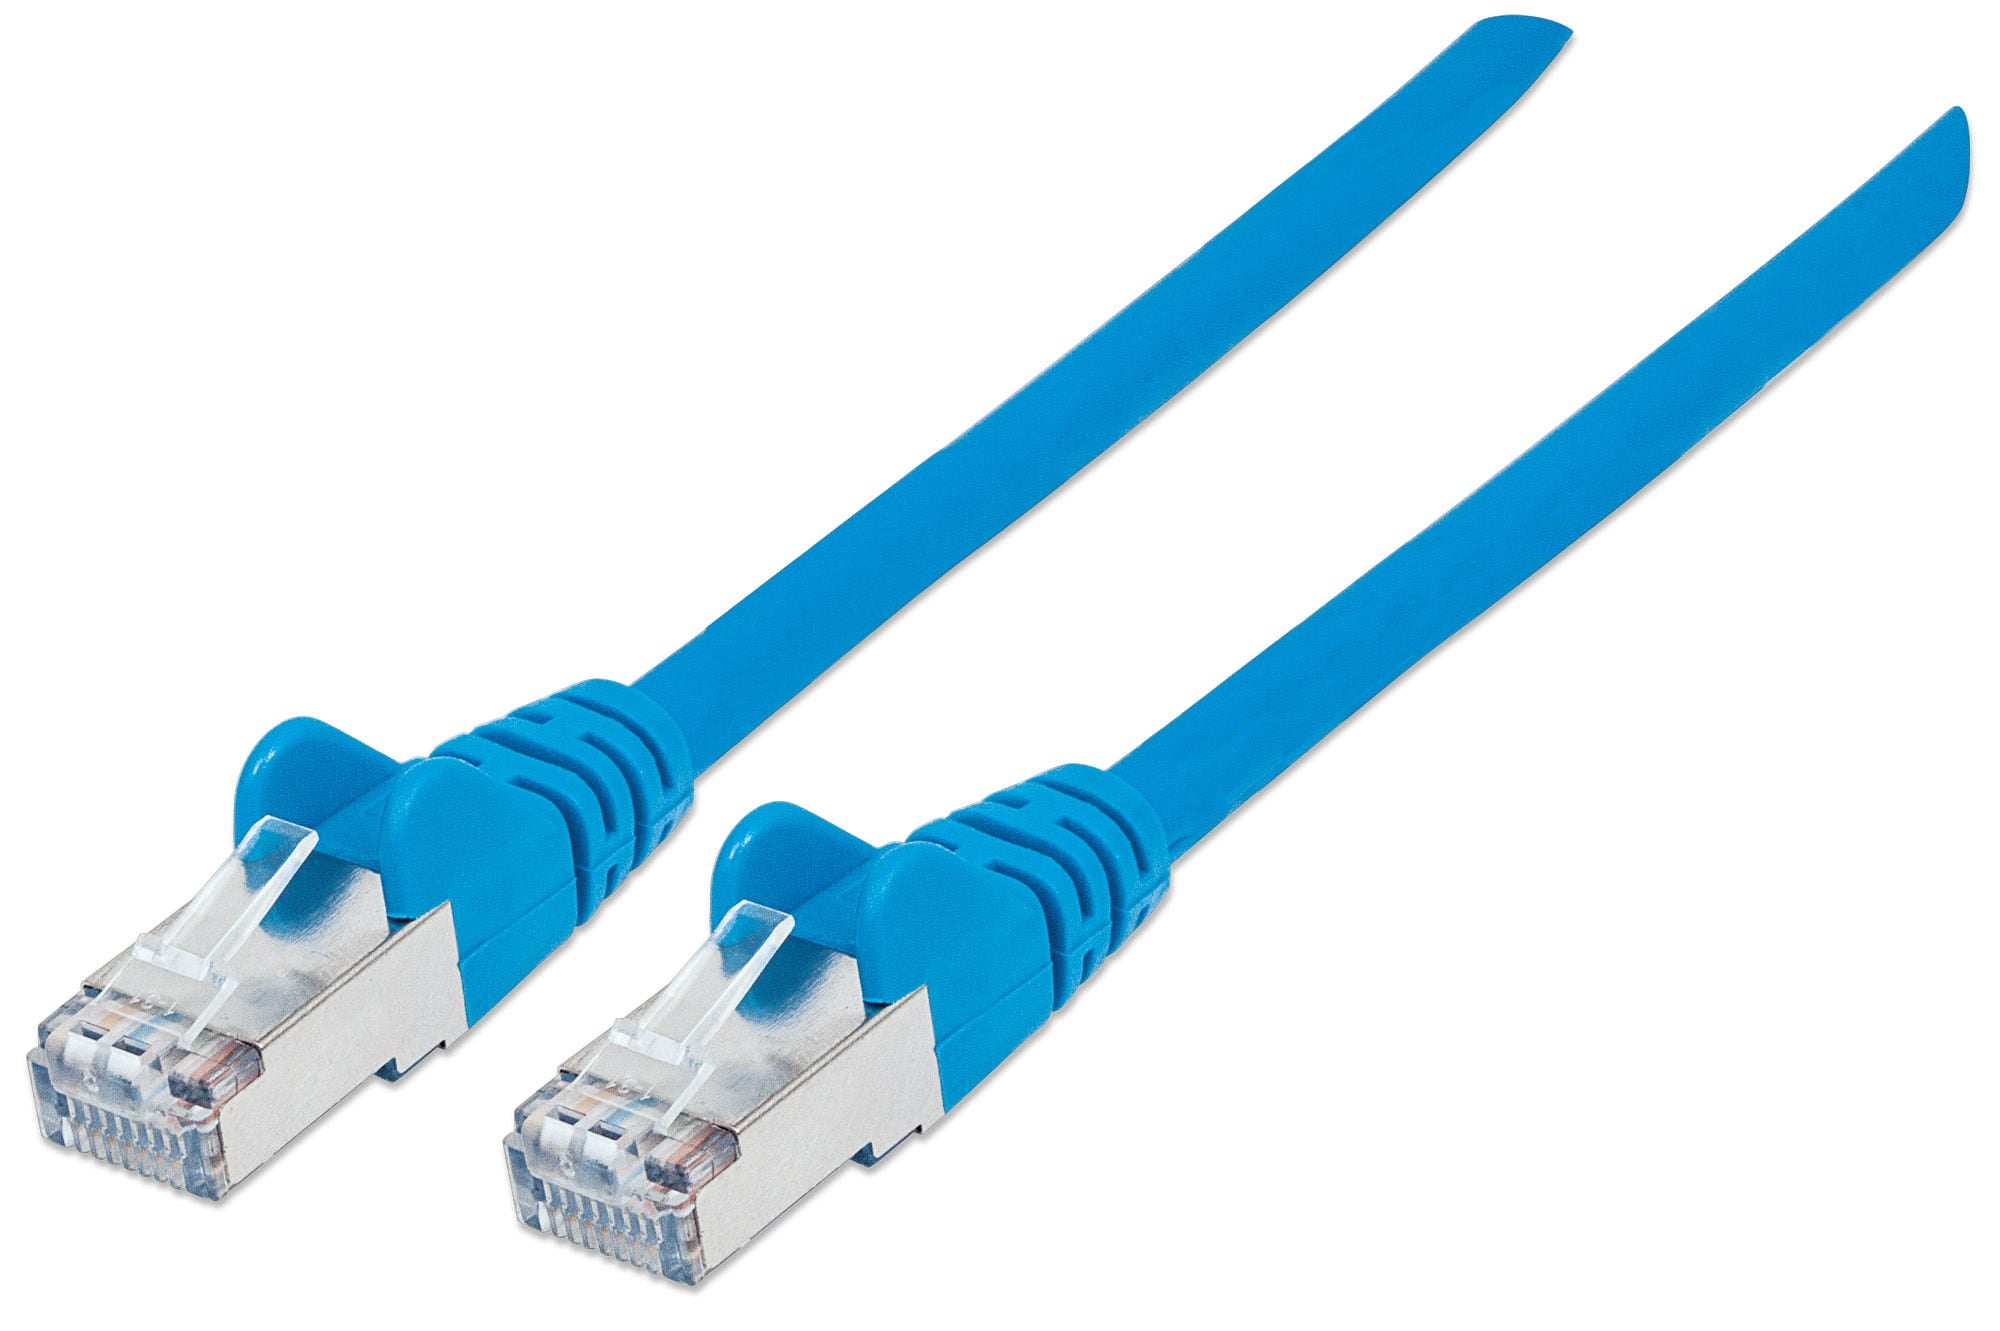 Intellinet Network Patch Cable, Cat6, 3m, Blue, Copper, S/FTP, LSOH / LSZH, PVC, RJ45, Gold Plated Contacts, Snagless, Booted, Lifetime Warranty, Polybag